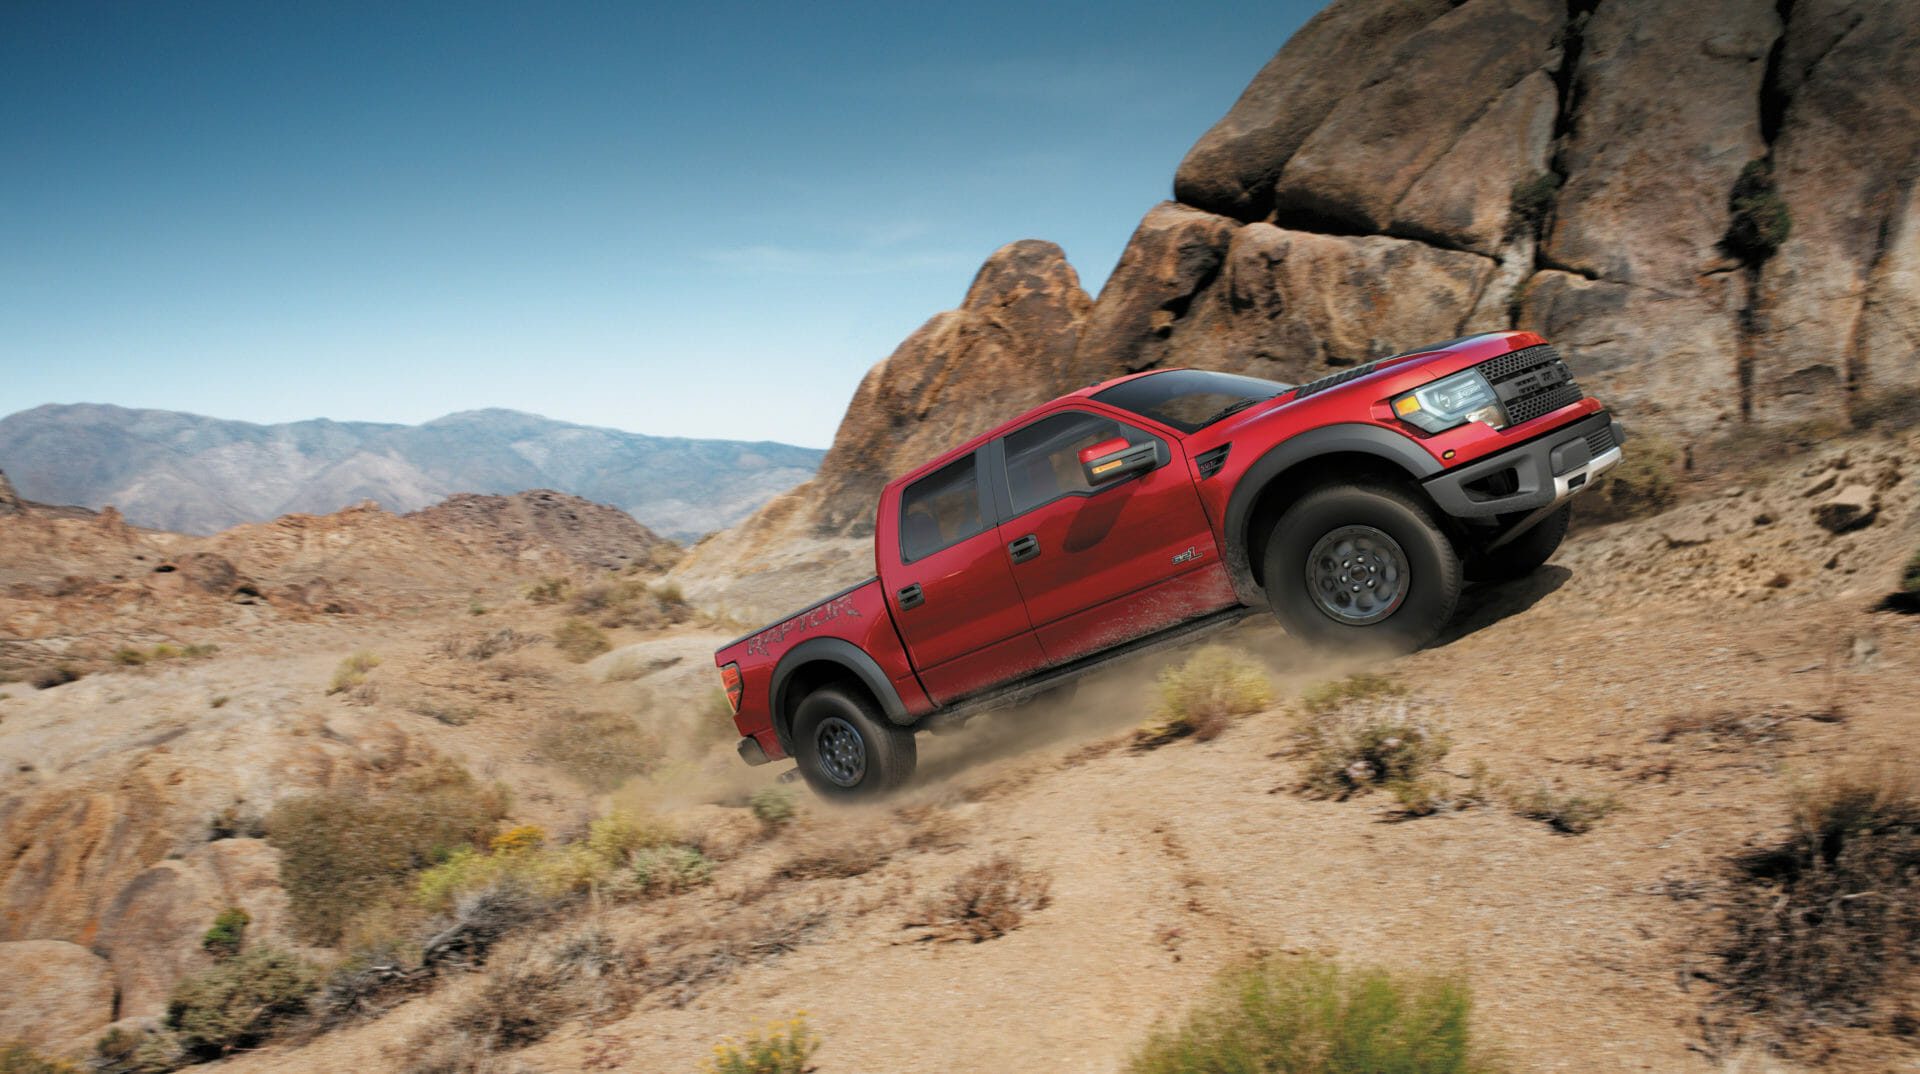 2014 F-150 SVT Raptor Special Edition Photo By Ford